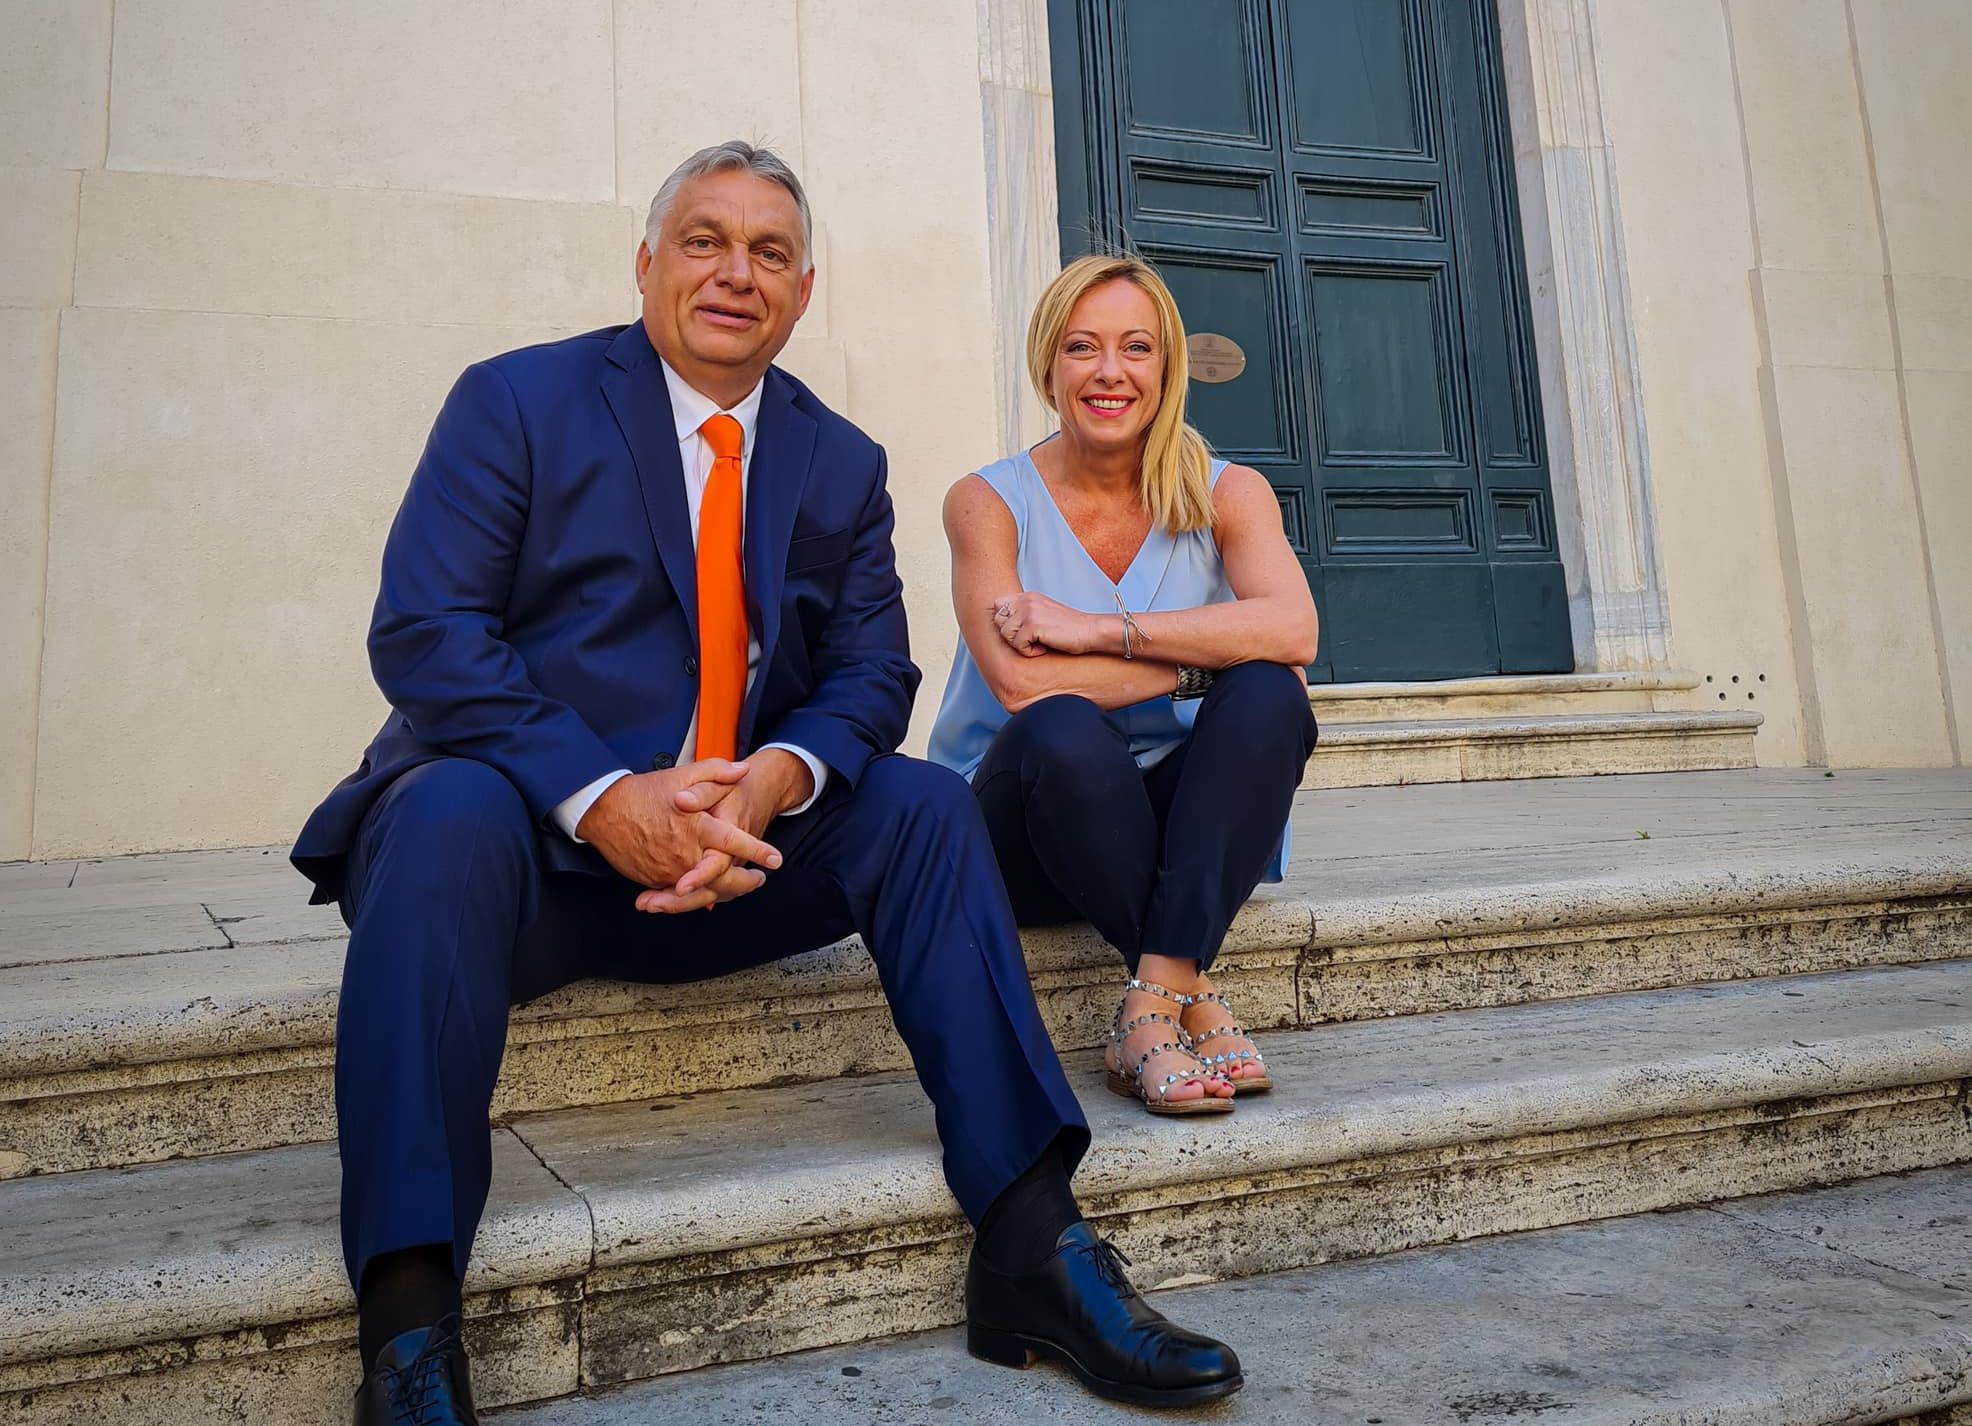 PM Orbán Meets Fratelli d'Italia Leader in Rome - Hungary Today